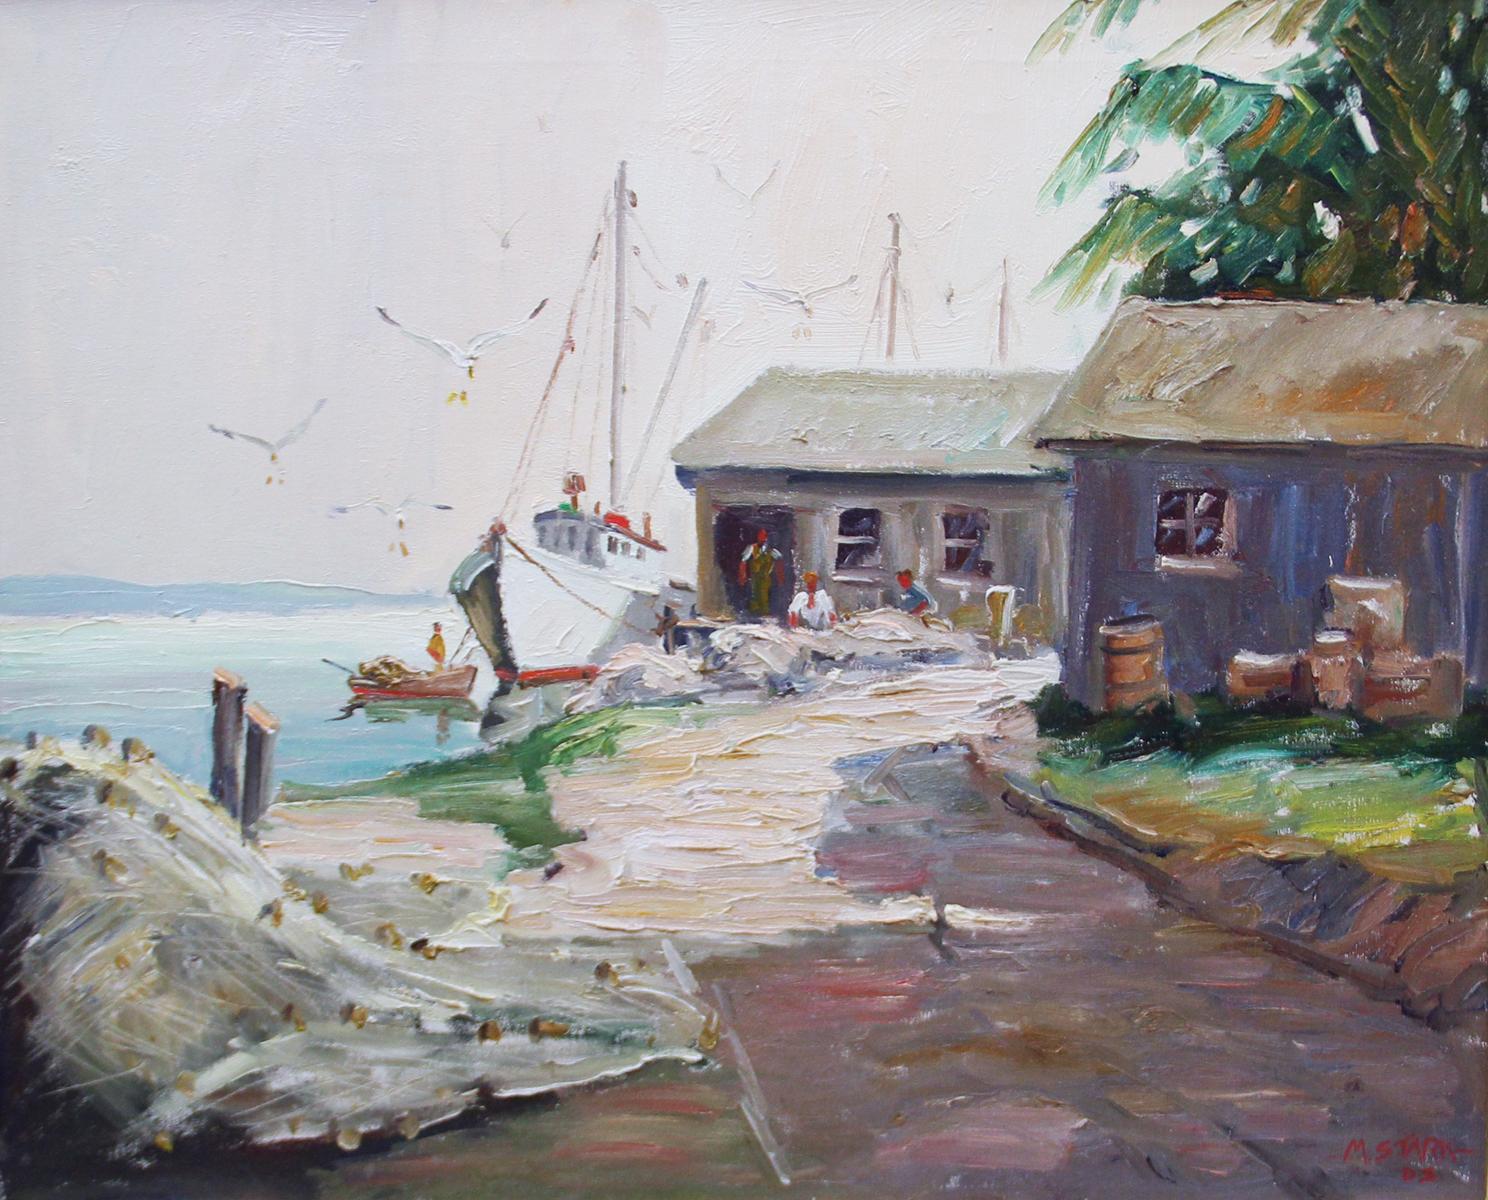 Bells Fish House, Long Boat Key, FL, Impressionist Marine Scene with Figures - Painting by Melville Stark